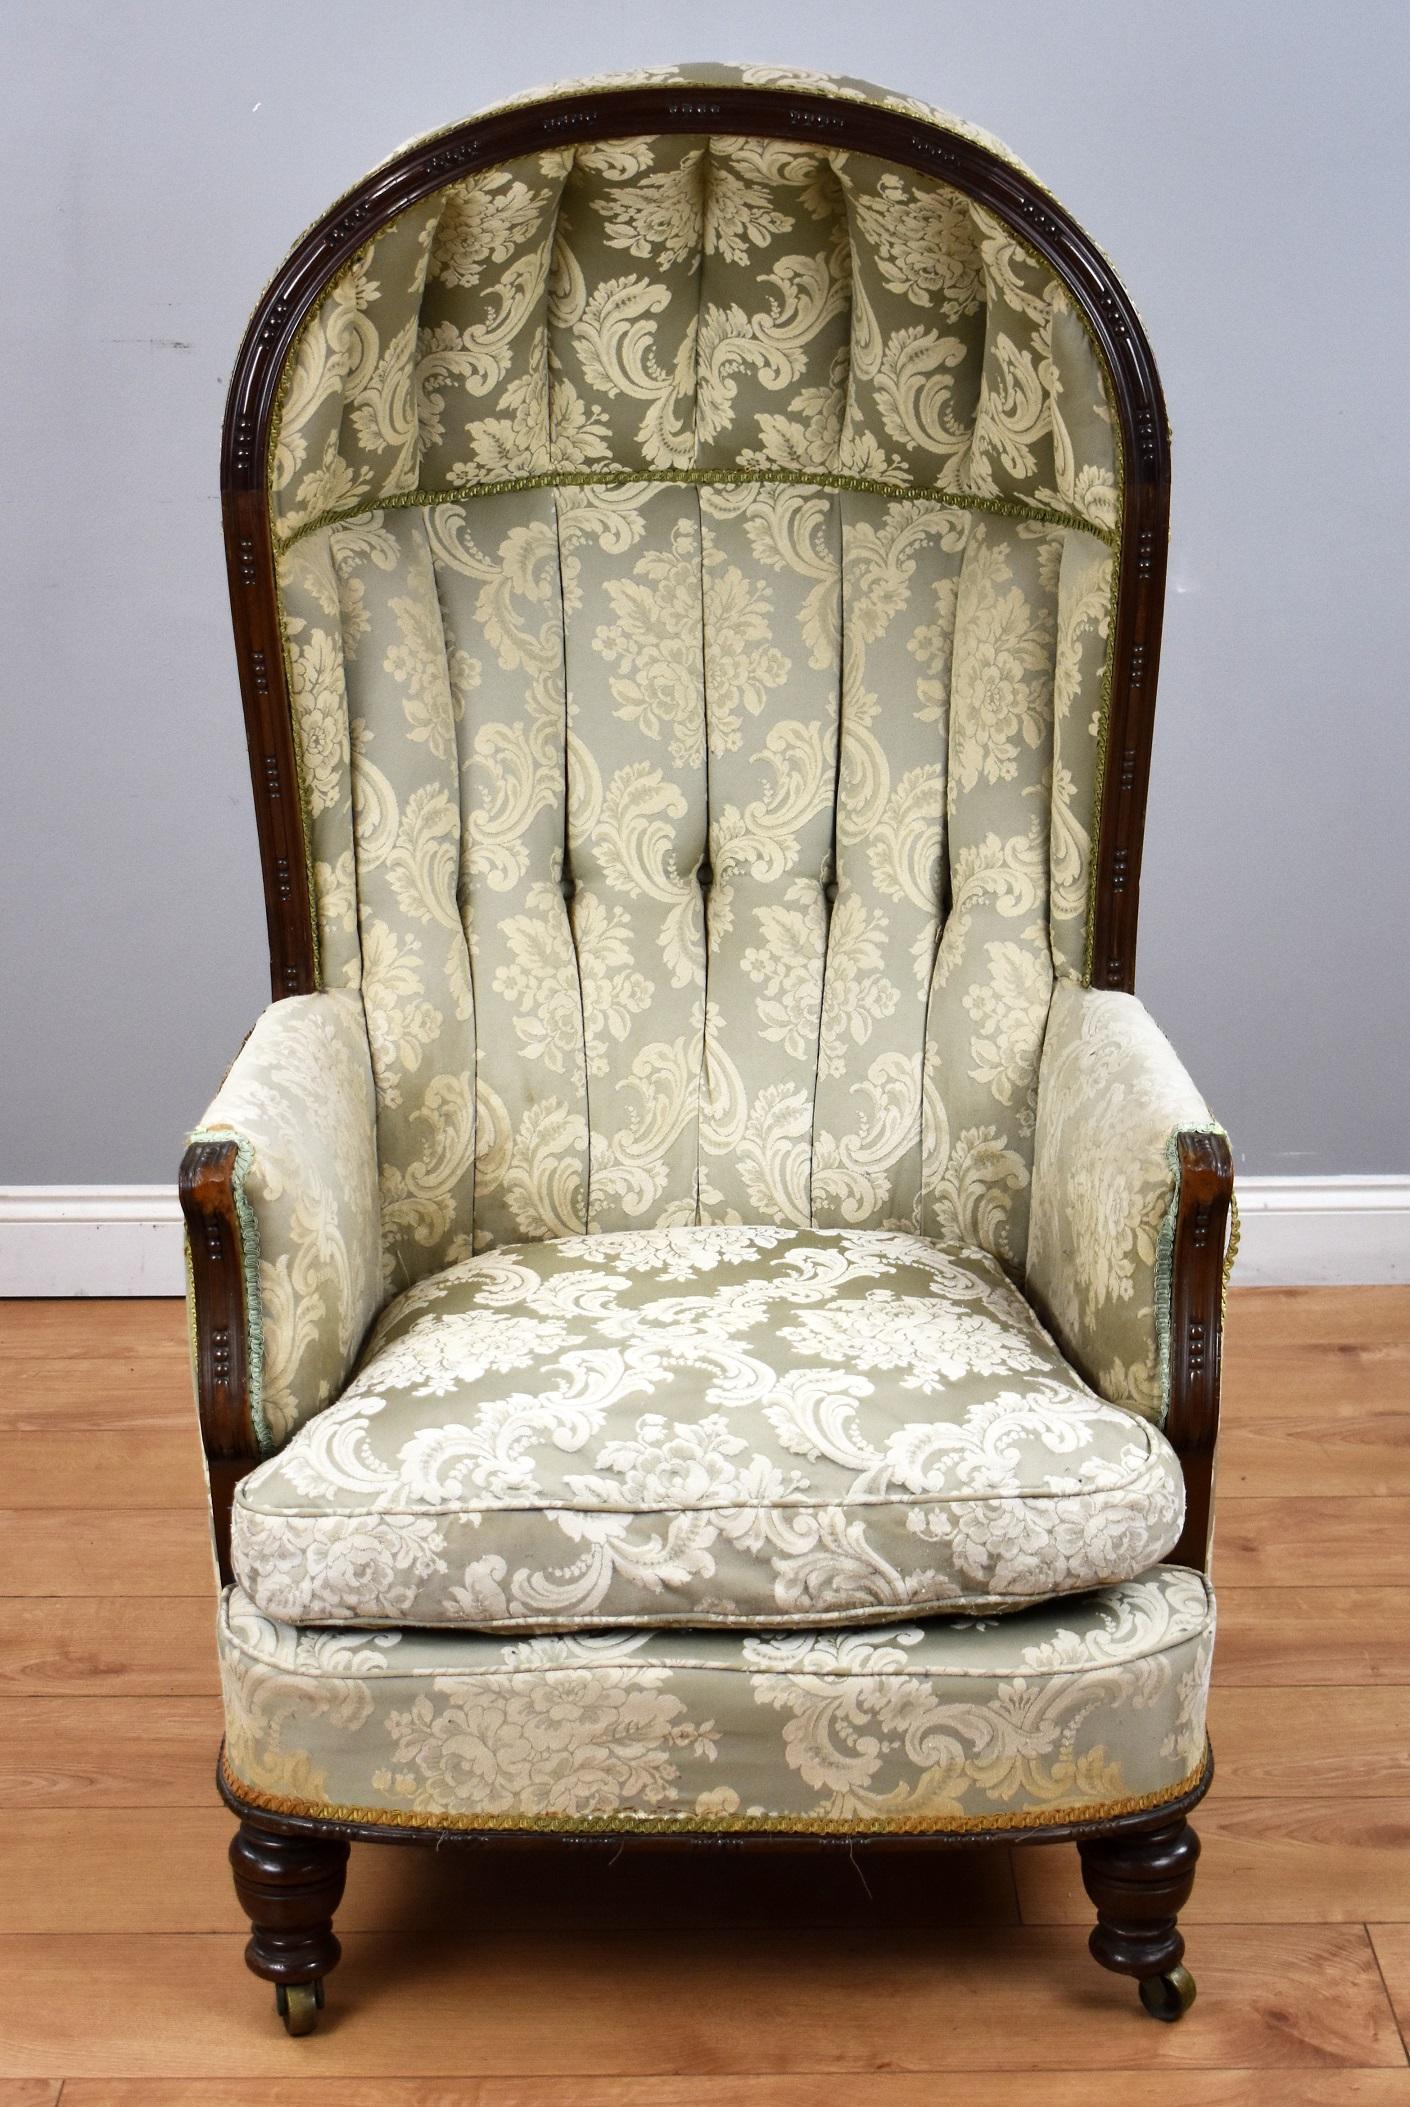 19th century mahogany porters chair in good condition, upholstered in a floral fabric, deep buttoned to the inside, stands on small turned legs on castors to the front and splayed feet on castors to the back.